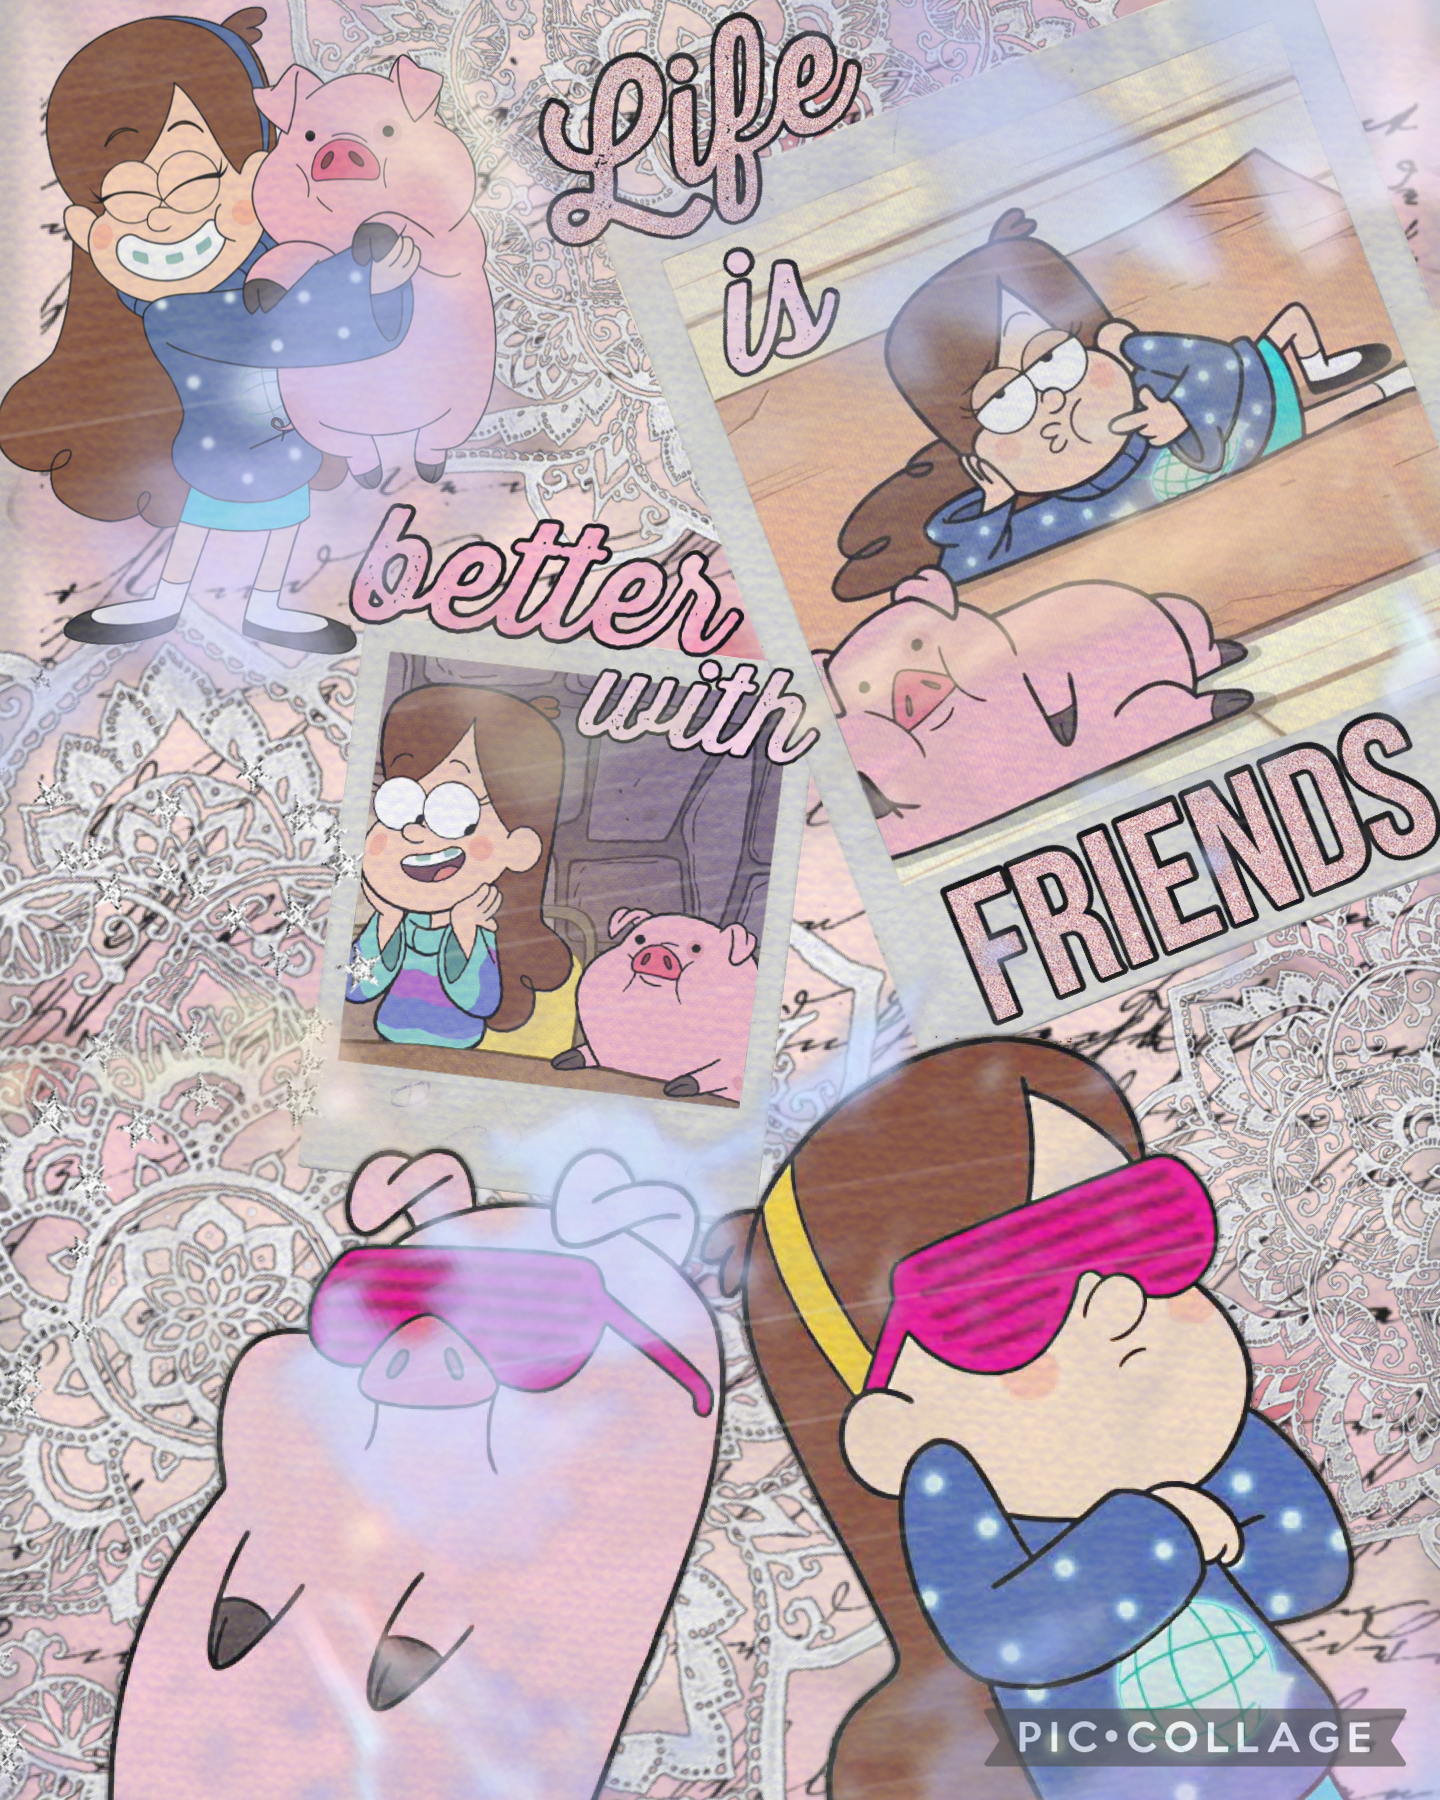 💕tapp💕
Mabel and Waddles from Gravity Falls💕
Collage requested by Evy_Lynn💕